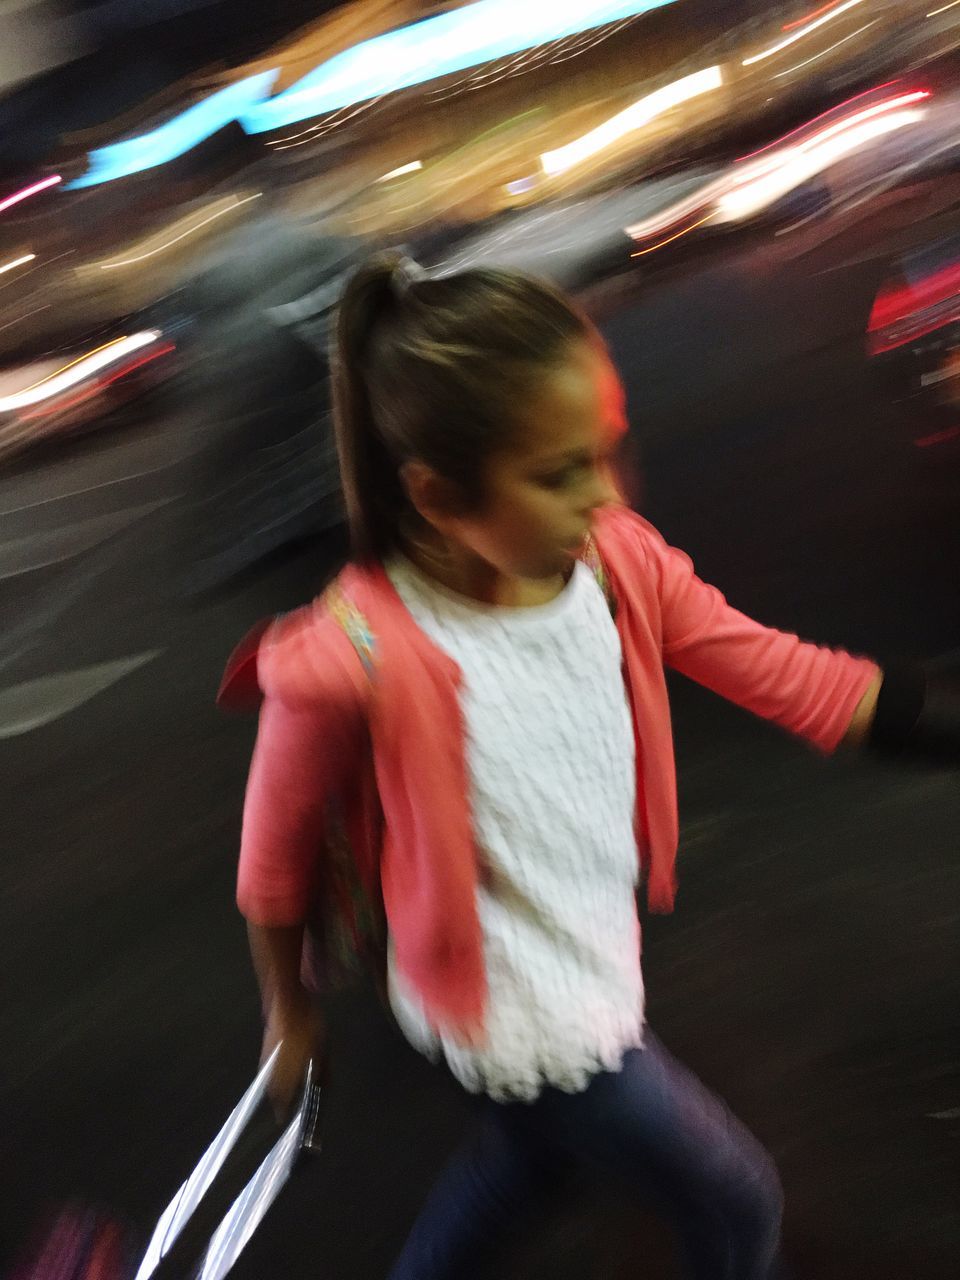 blurred motion, motion, on the move, illuminated, long exposure, casual clothing, night, red, young adult, nightlife